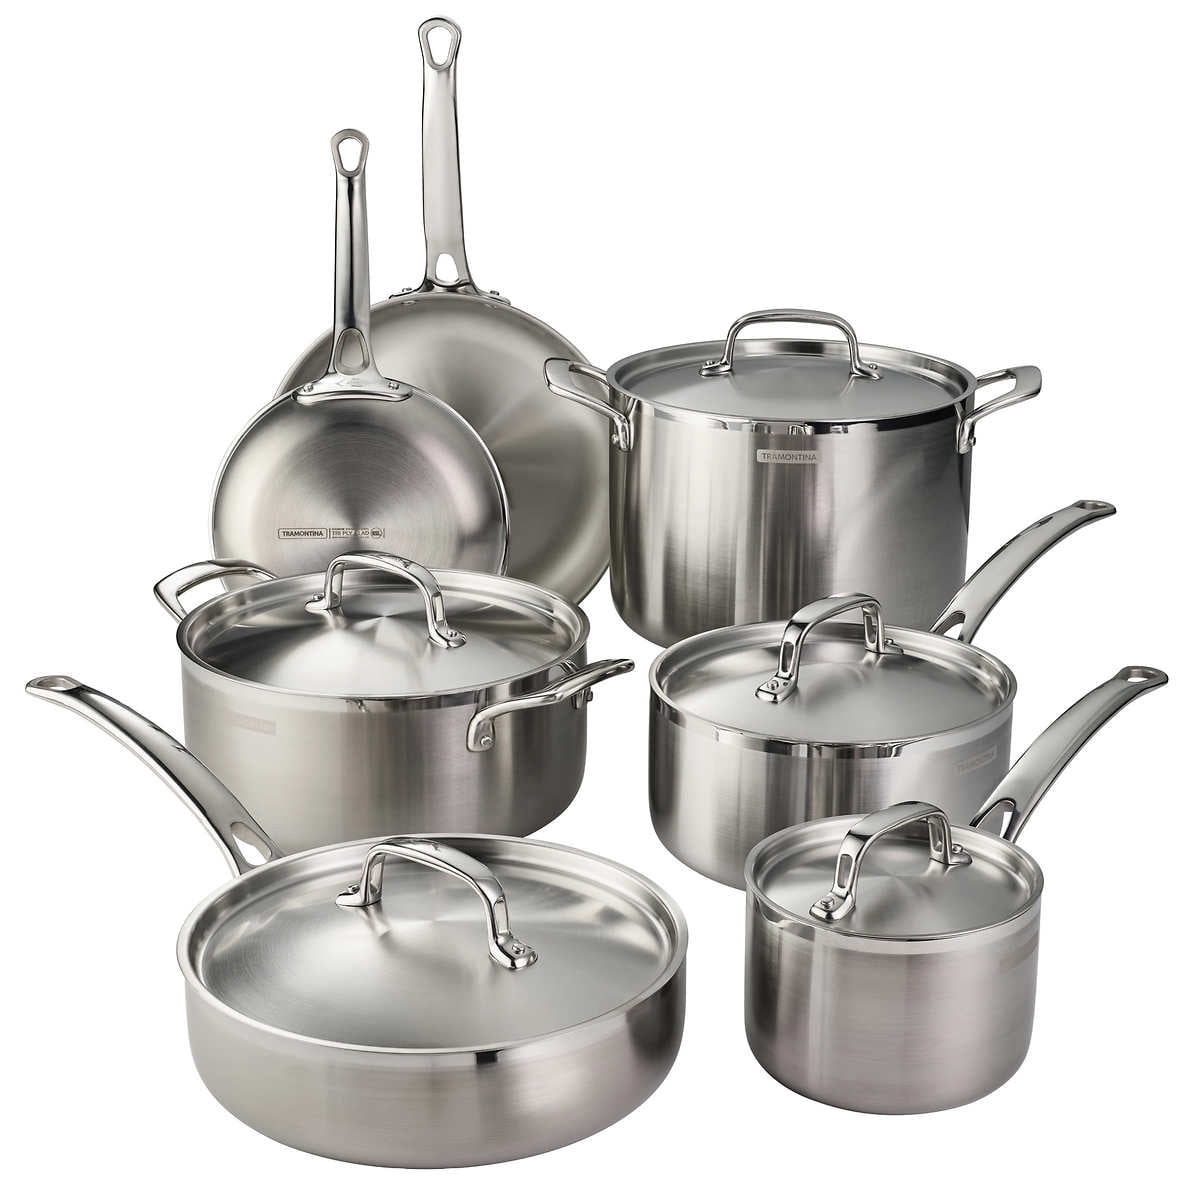 Tramontina 12-Piece Stainless Steel Tri-Ply Clad Cookware Set Only $199.97  + Free Shipping - Kollel Budget